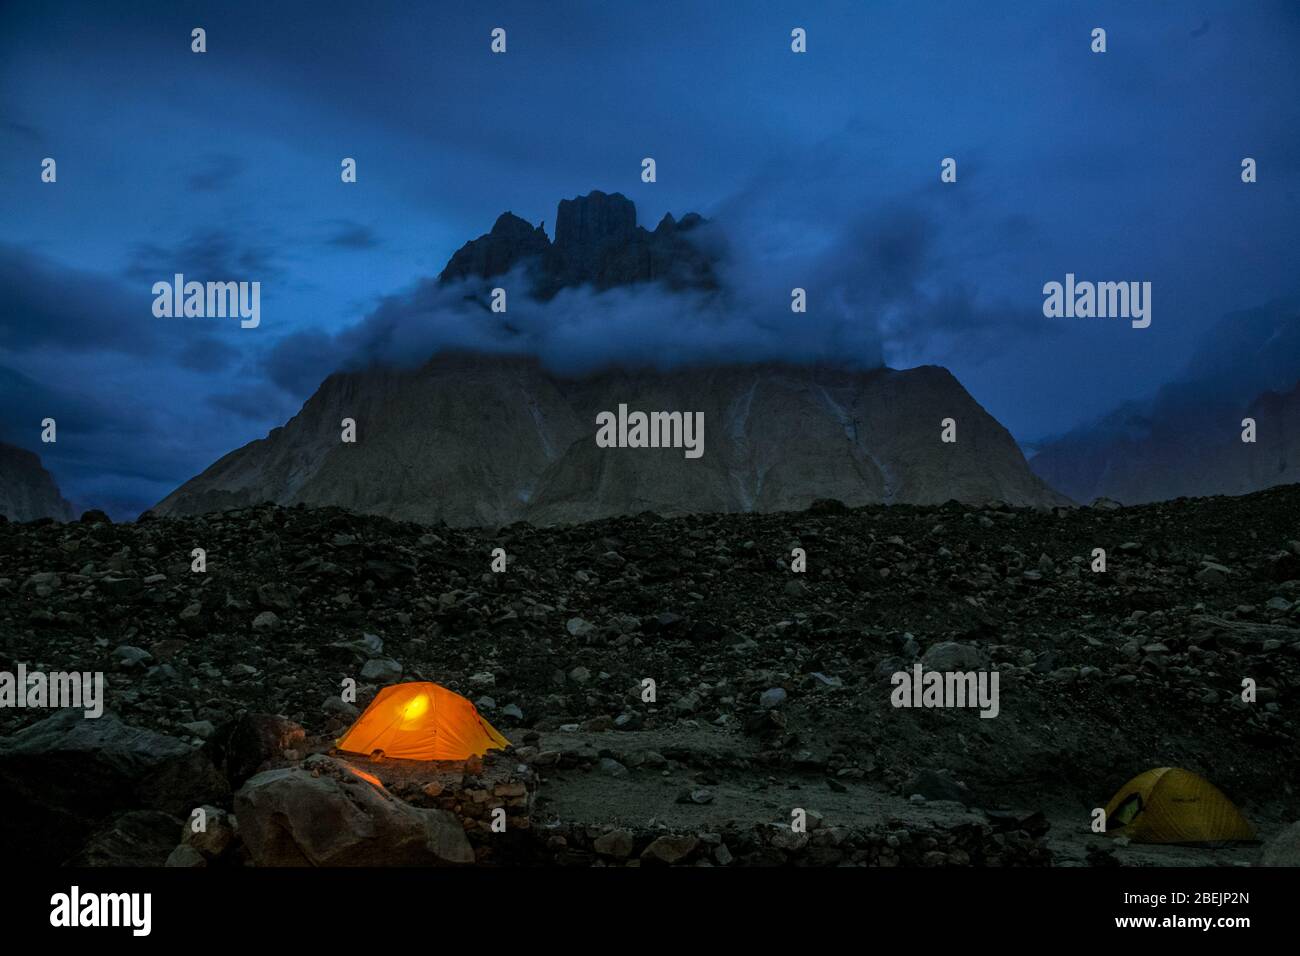 A small tent, lit from the inside, during late evening in front of Trango Tower on the Baltoro Glacier in the Karakoram Mountains in Pakistan. Stock Photo